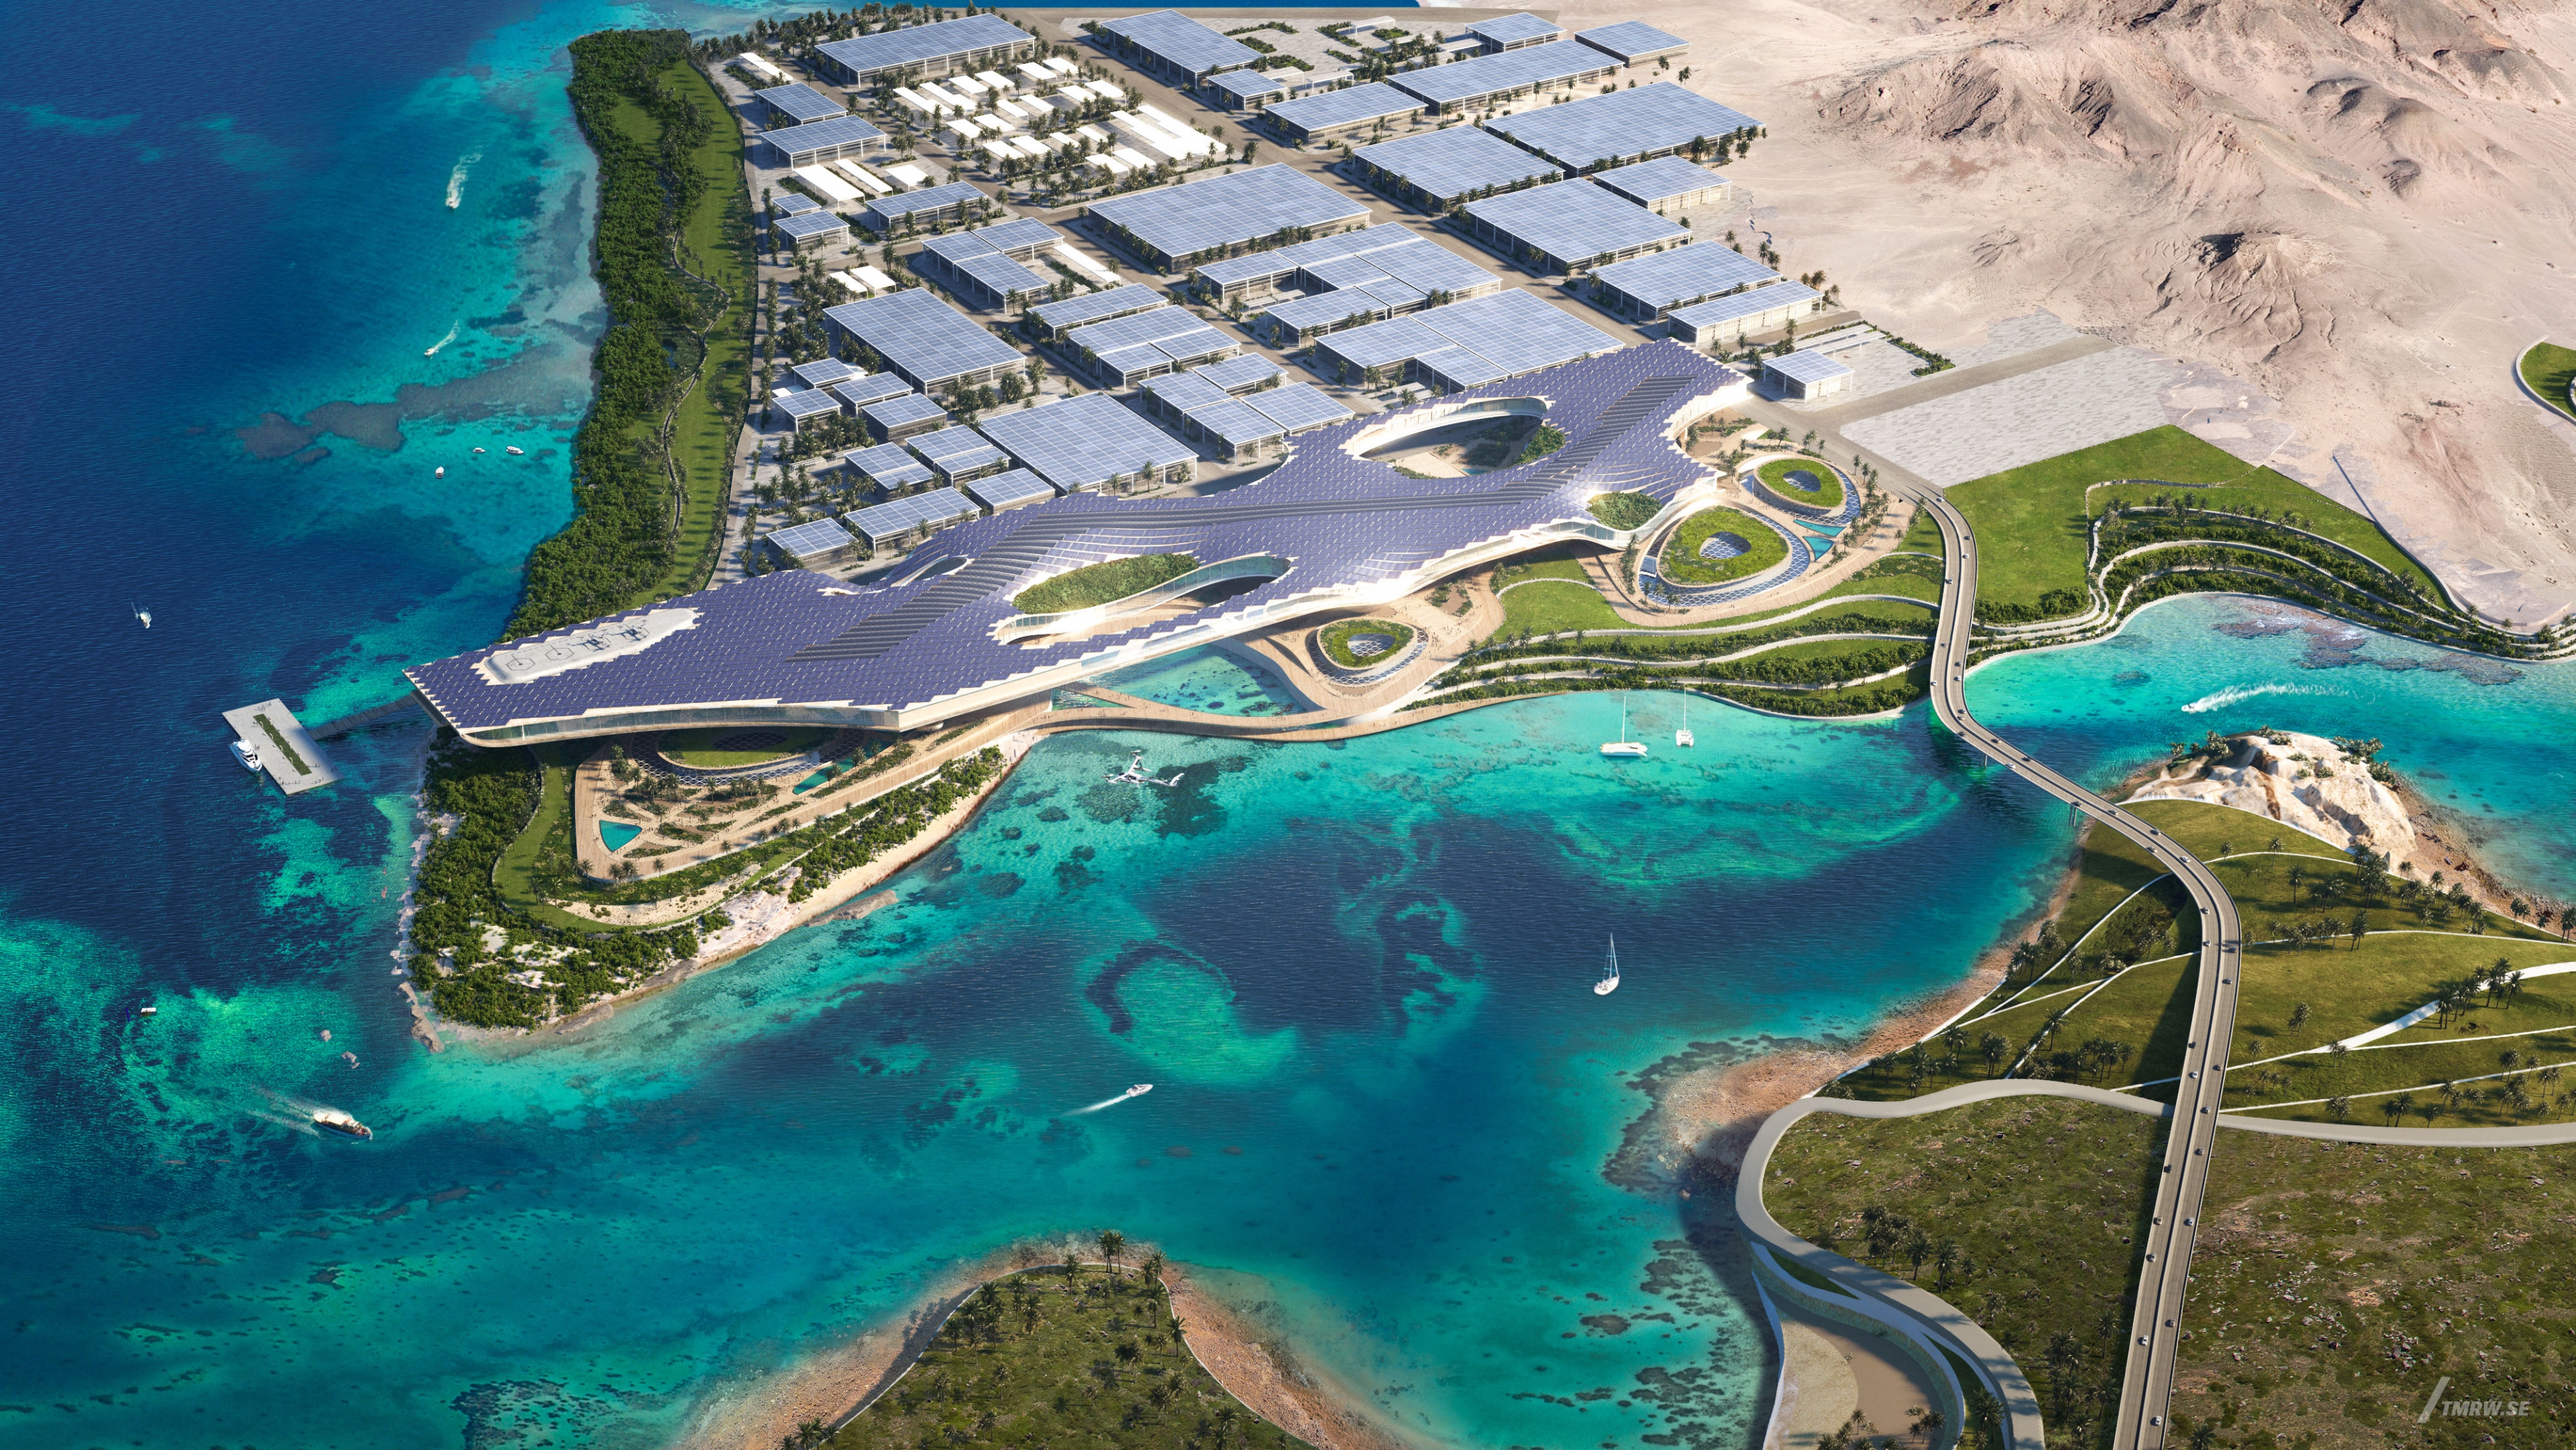 Architectural visualization of NEOM for Foster + Partners. An image of a city driven by solar panels by the ocean from a aerial view in daylight.